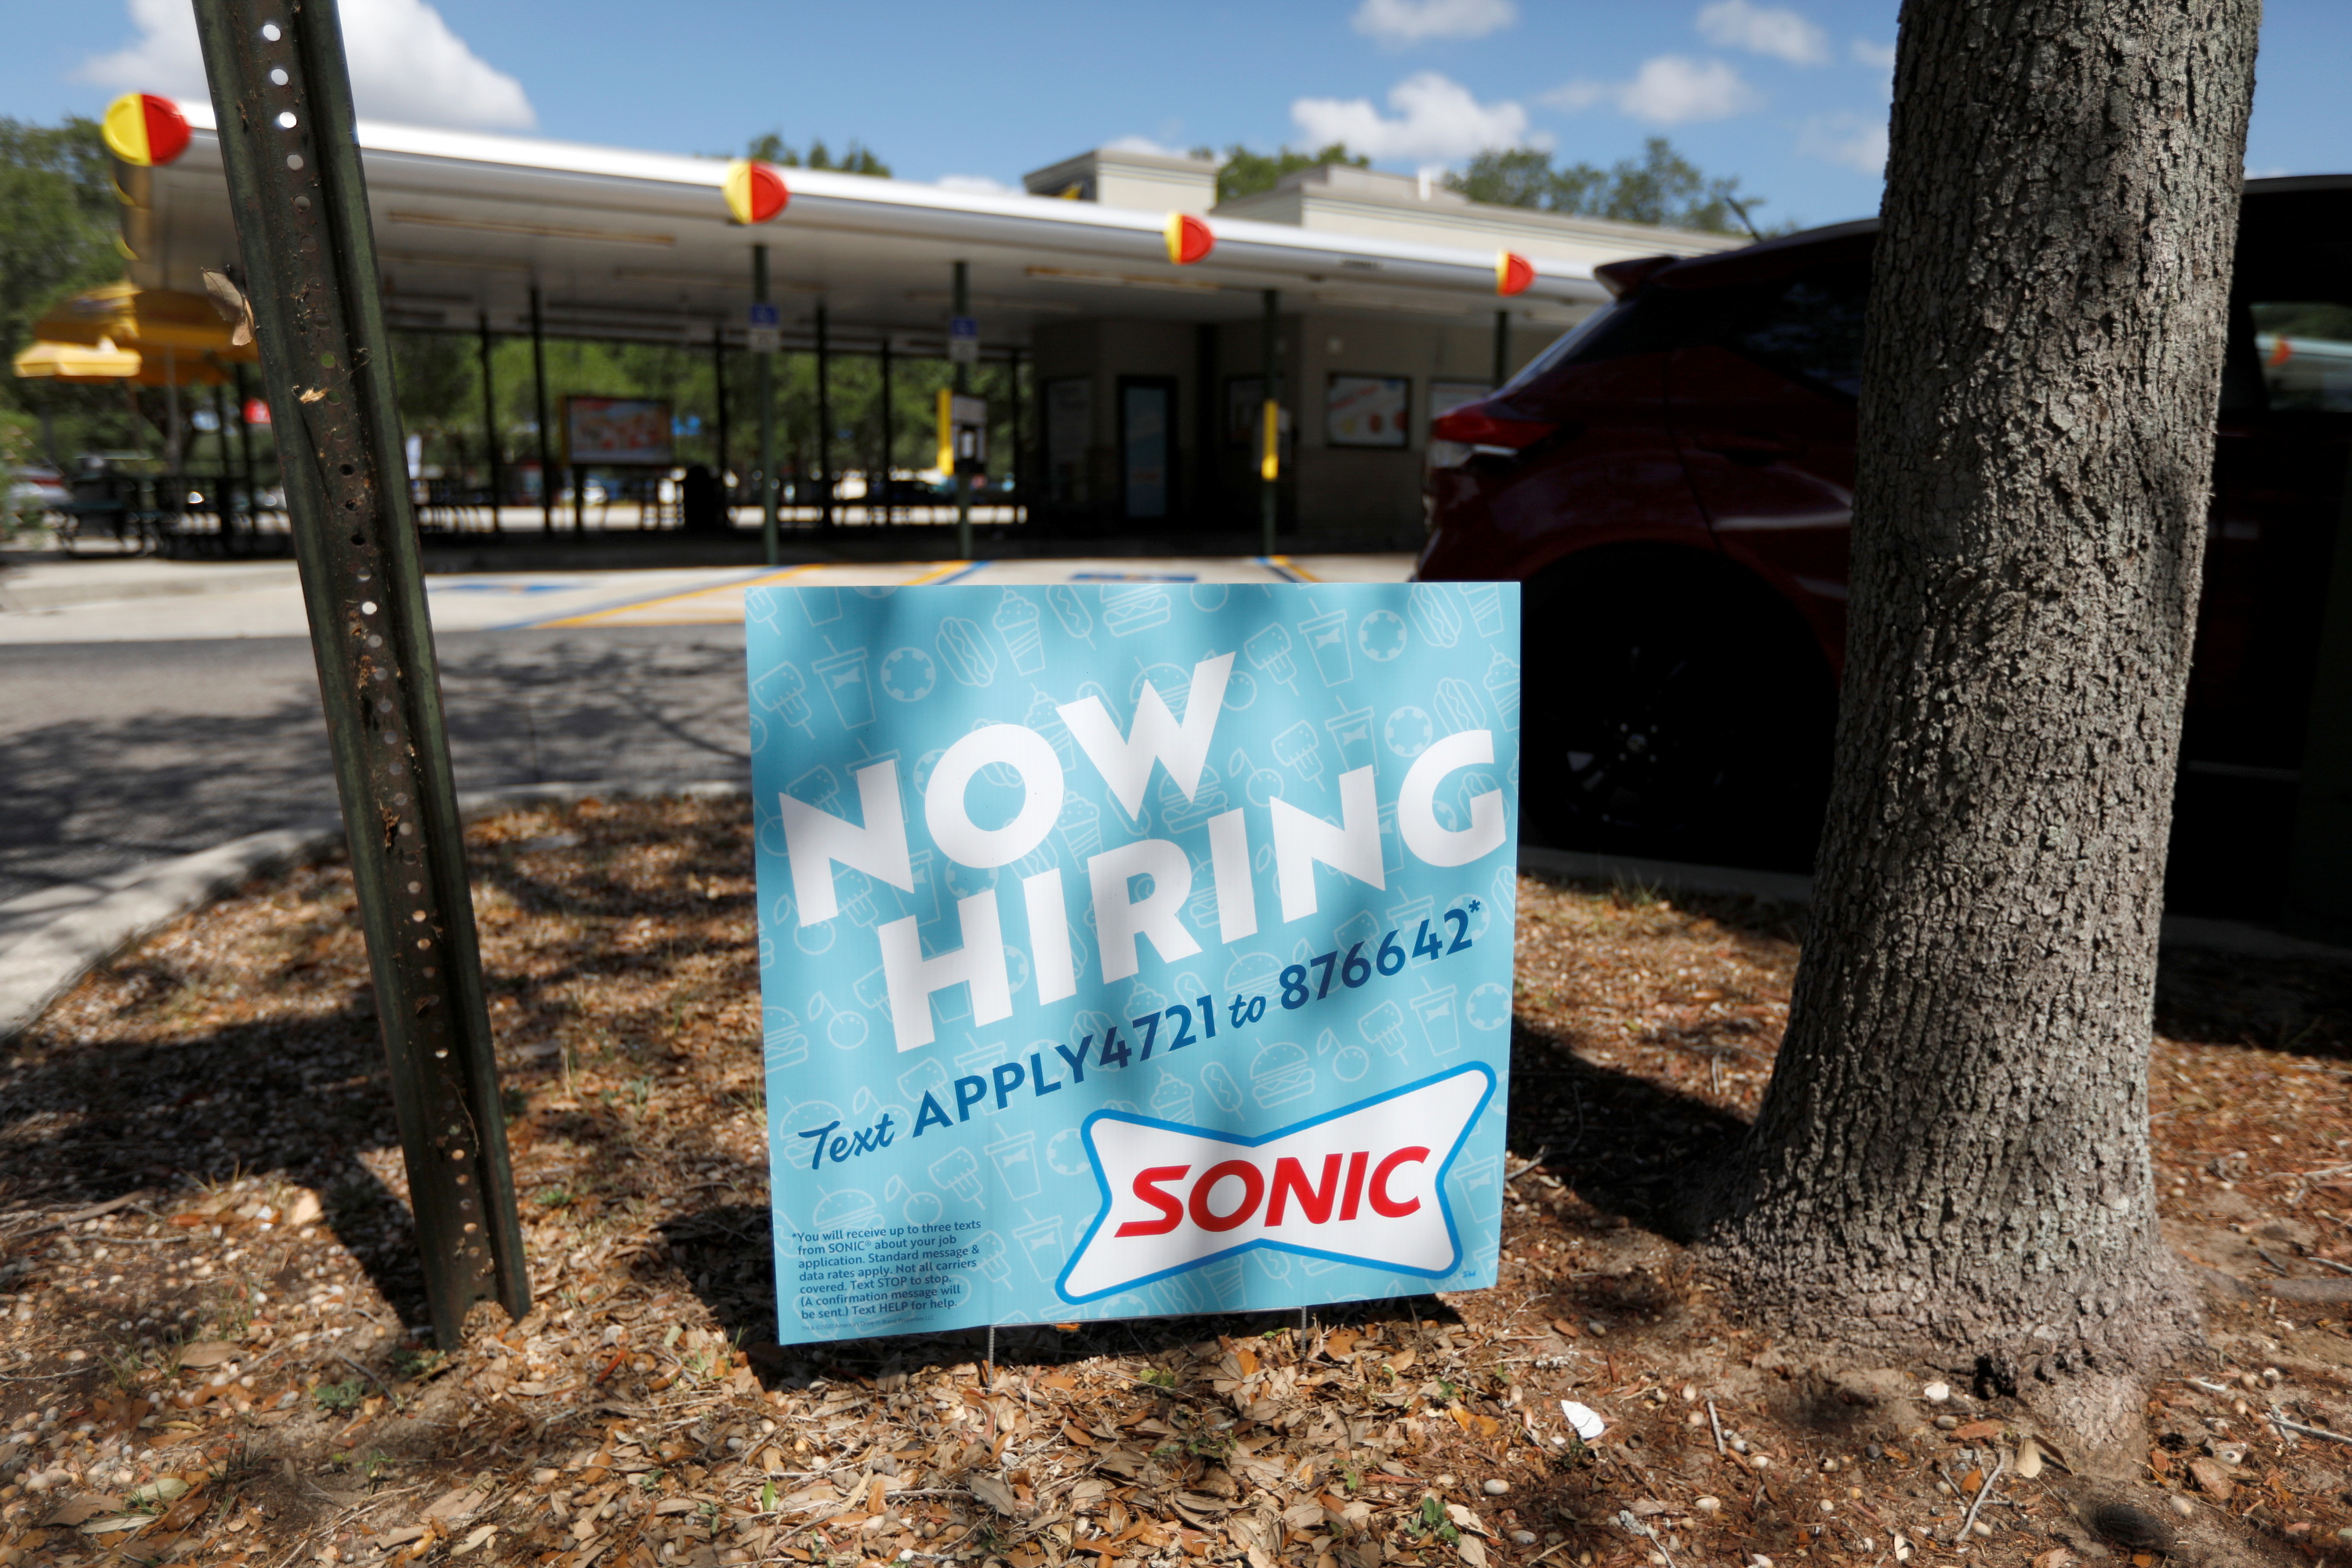 Help wanted signs appear across Tampa